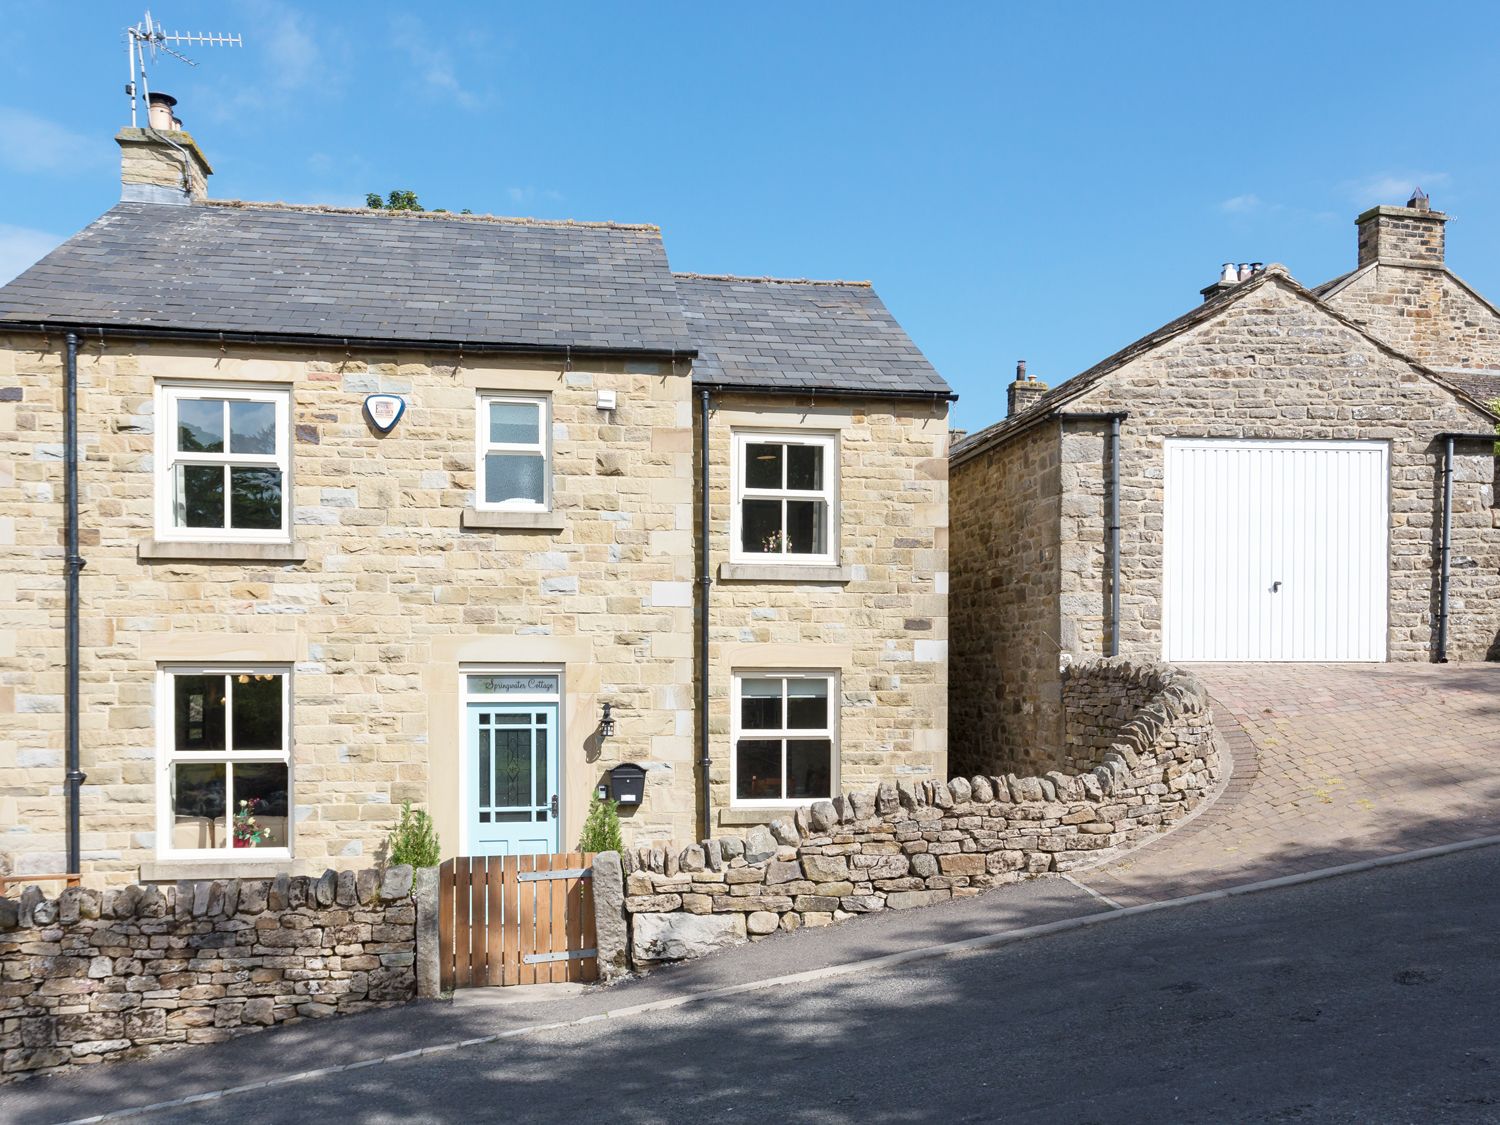 1 Springwater View - Yorkshire Dales - 914093 - photo 1